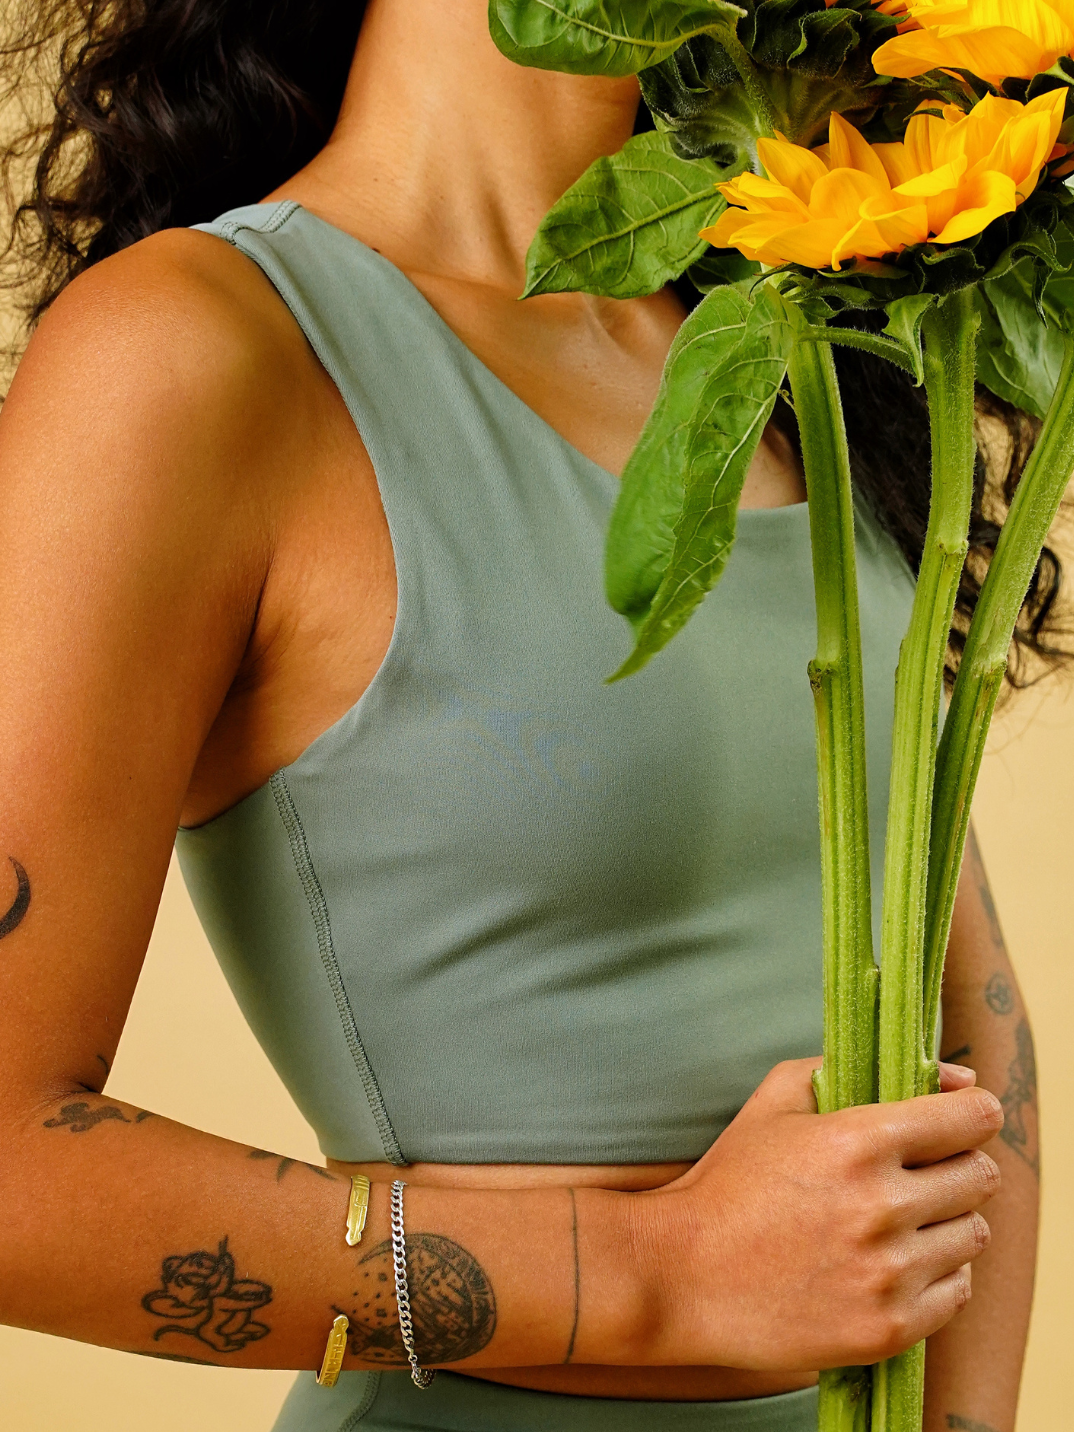 everyday top sports bra natural green eco-friendly ethical activewear made from recycled plastic bottles